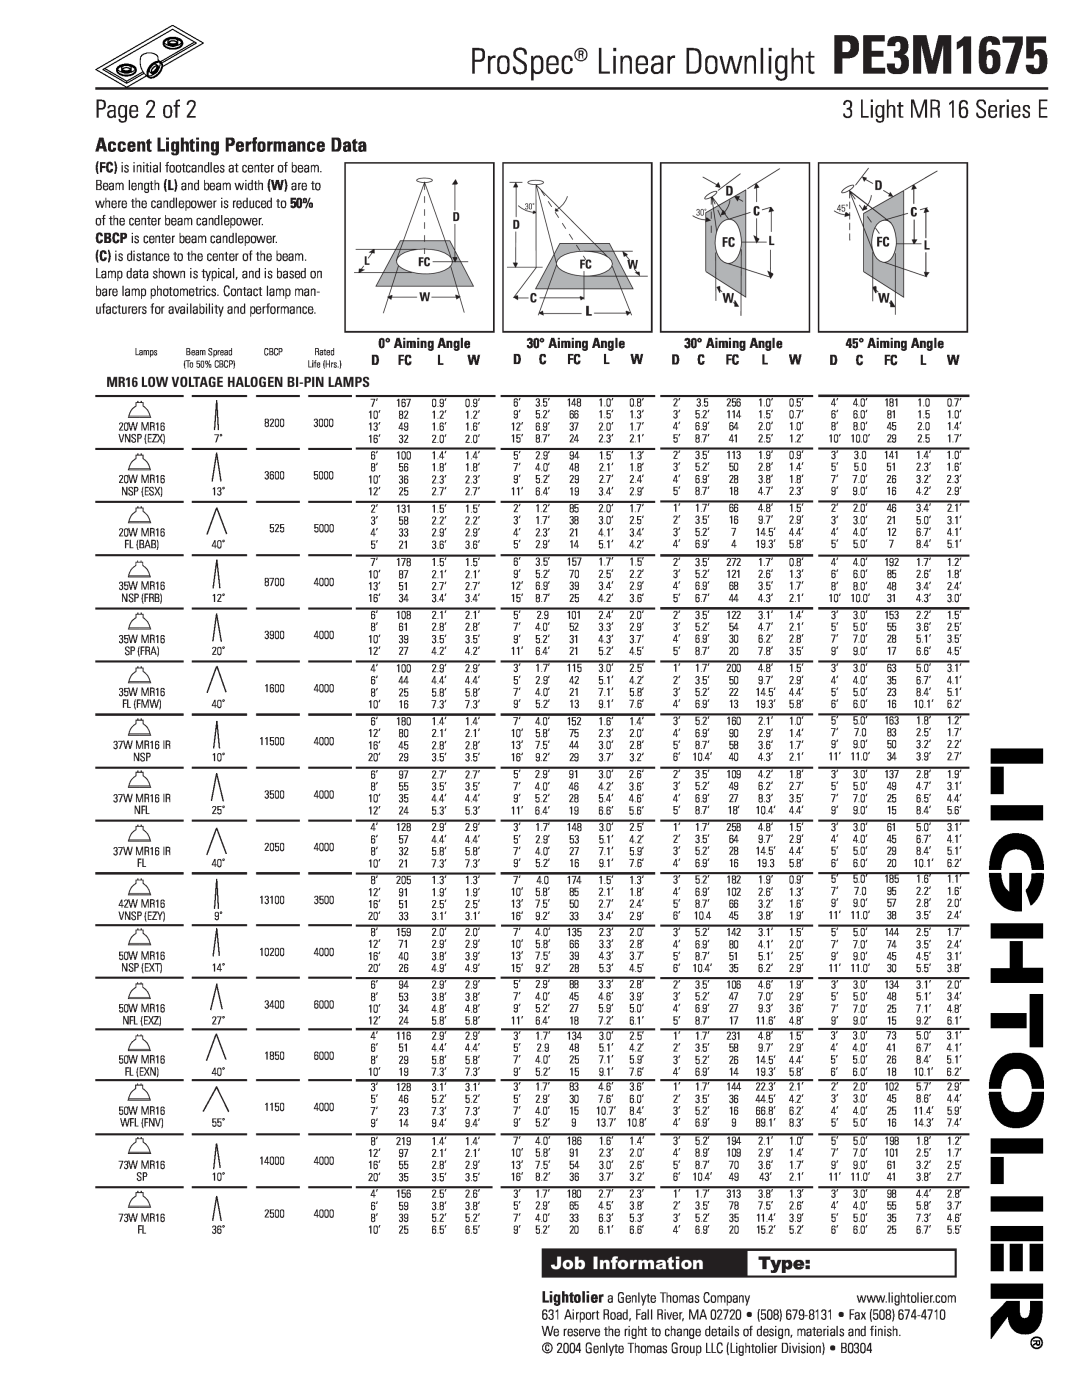 Lightolier manual Page 2 of, Job Information, Aiming Angle, D C Fc L W, ProSpec Linear Downlight PE3M1675, Type 